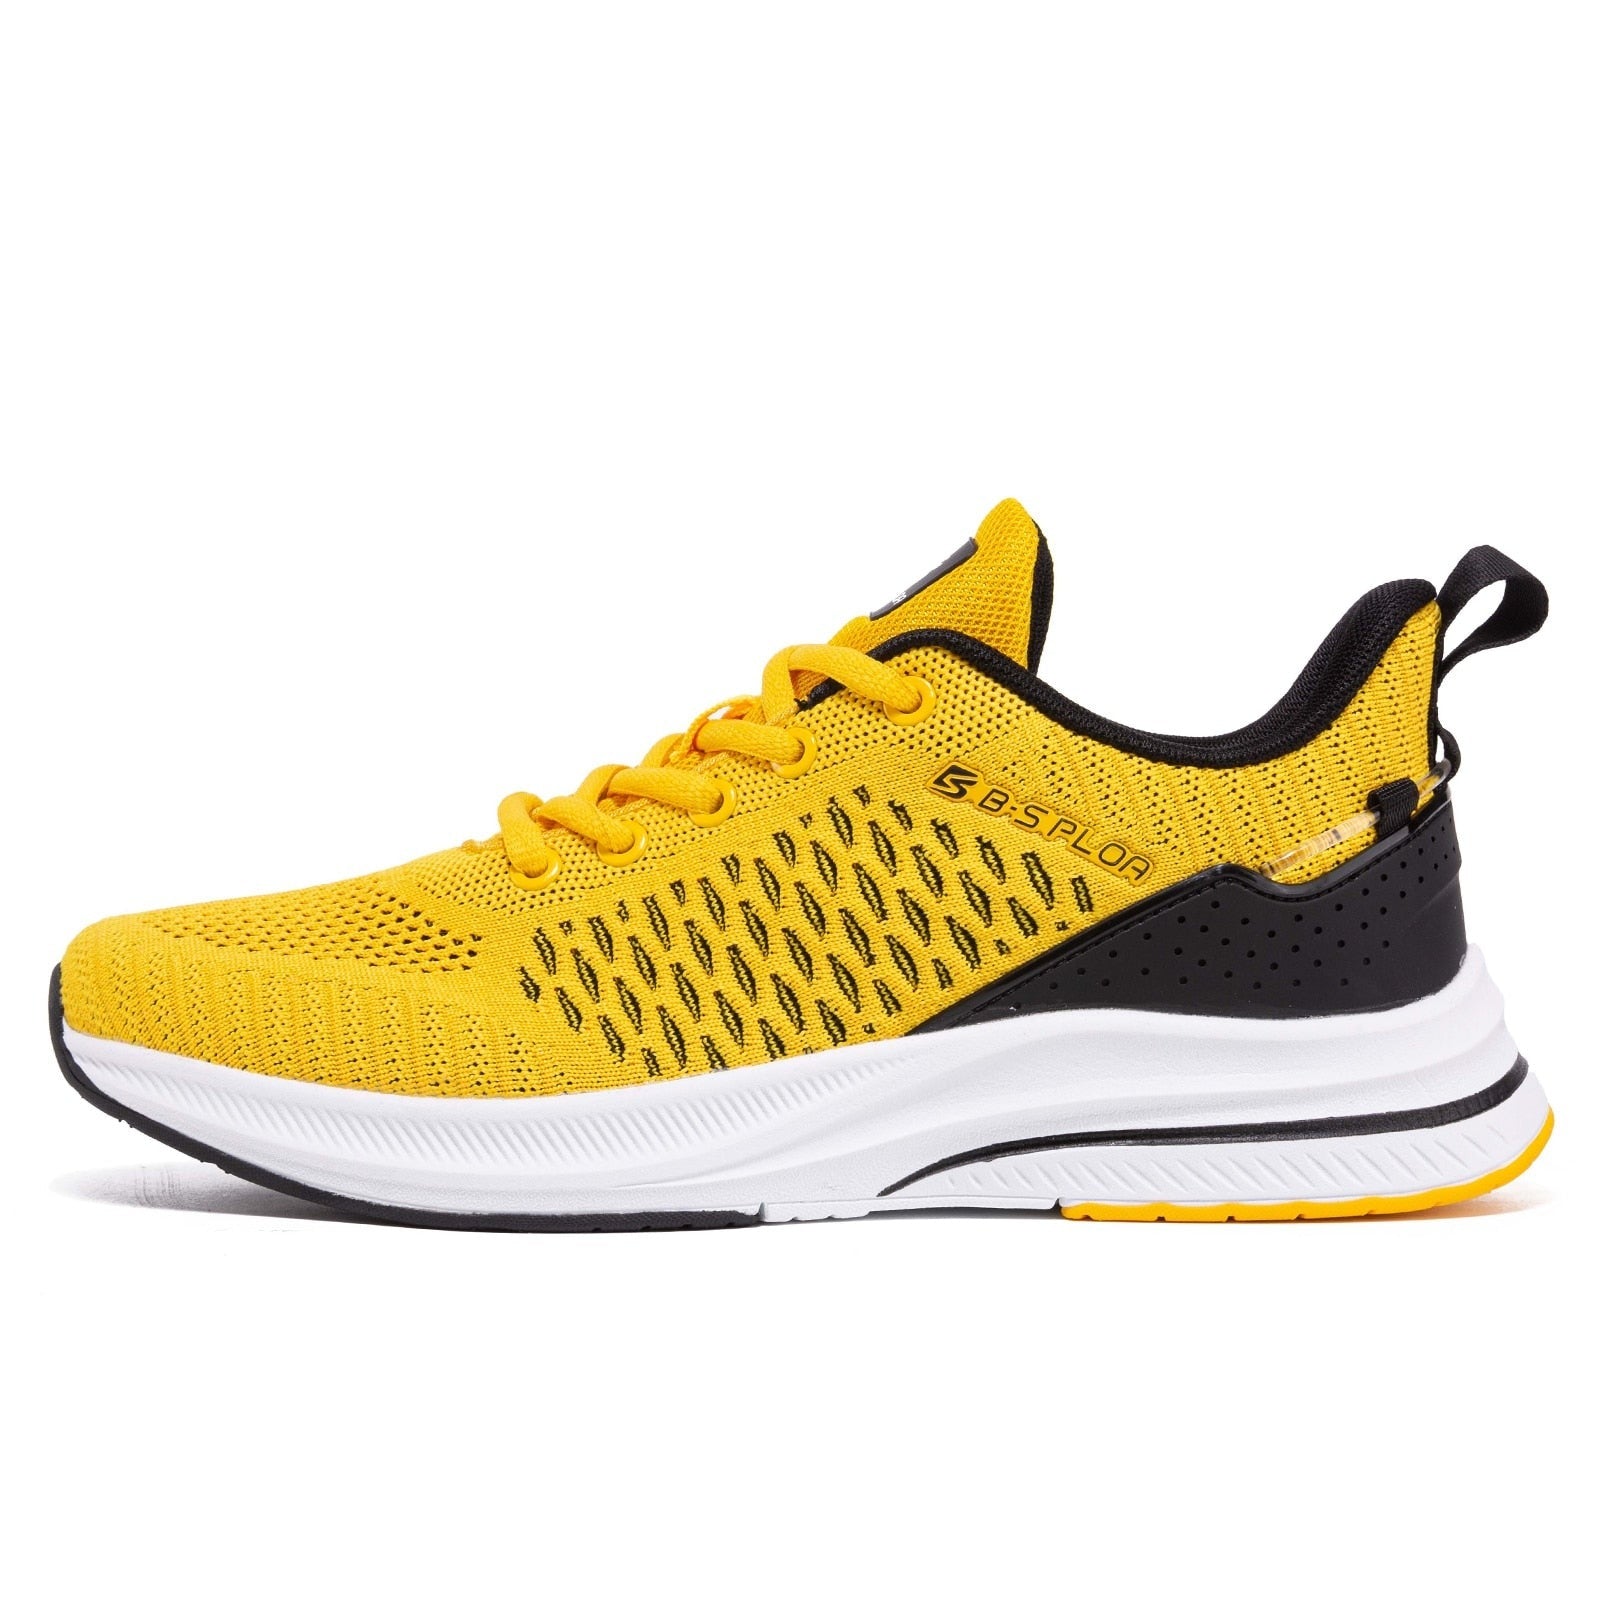 Baasploa Lightweight Mesh Running Shoes for Men with response cushion technology